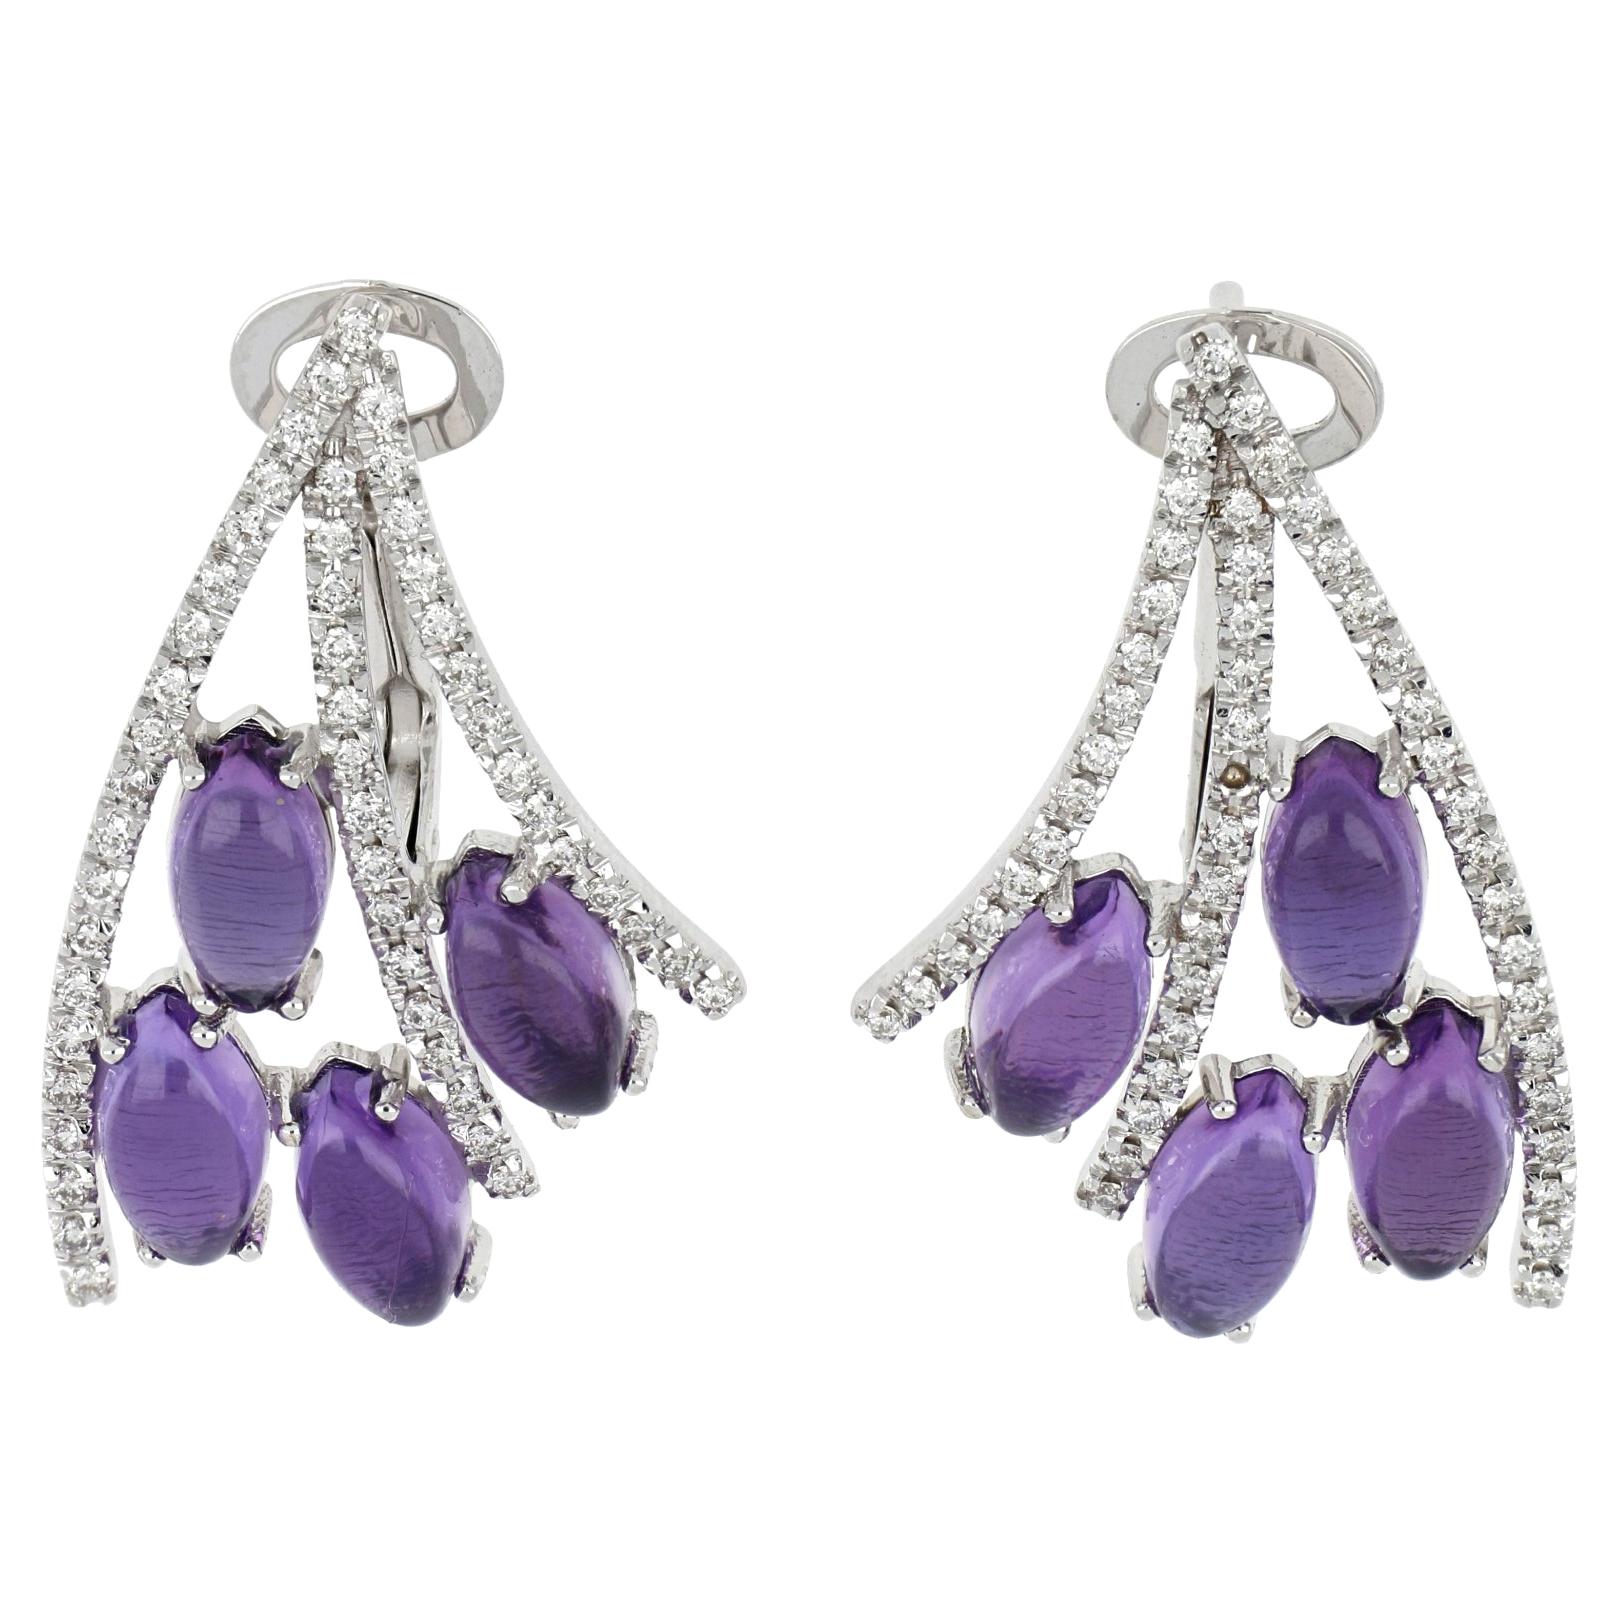 18kt White Gold Les Papillons Earrings with Purple Amethyst and Diamonds